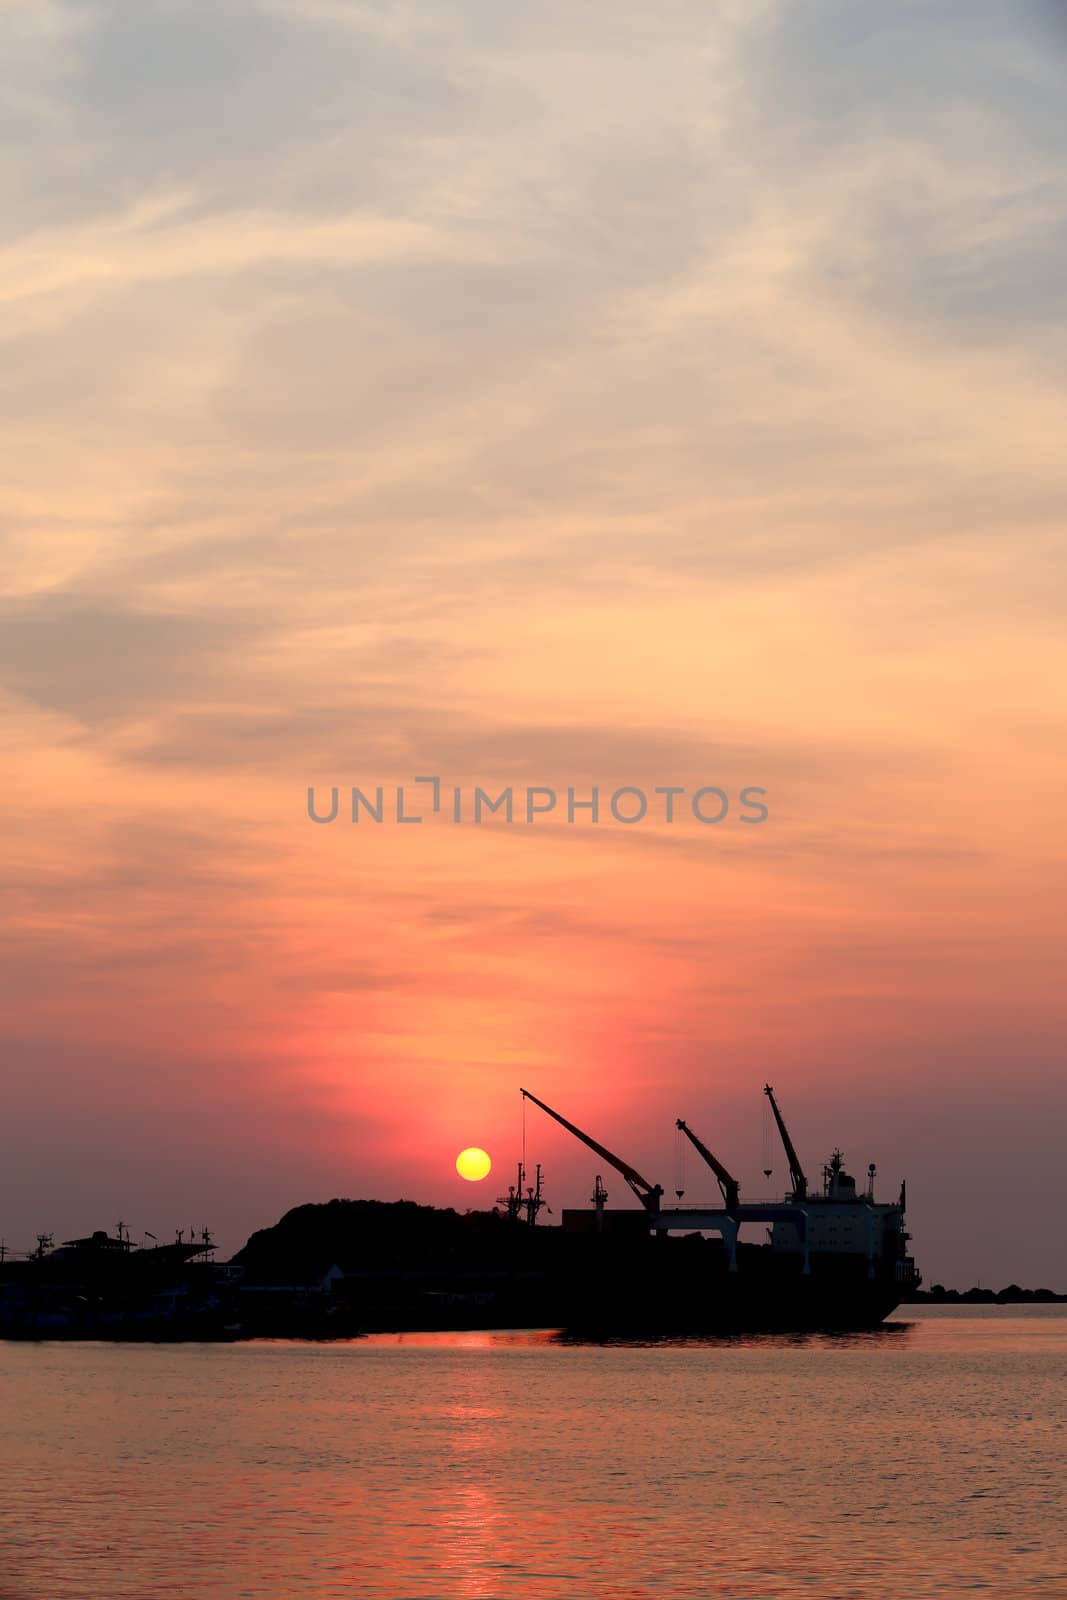 Cargo ship in the harbor at sunset by rufous